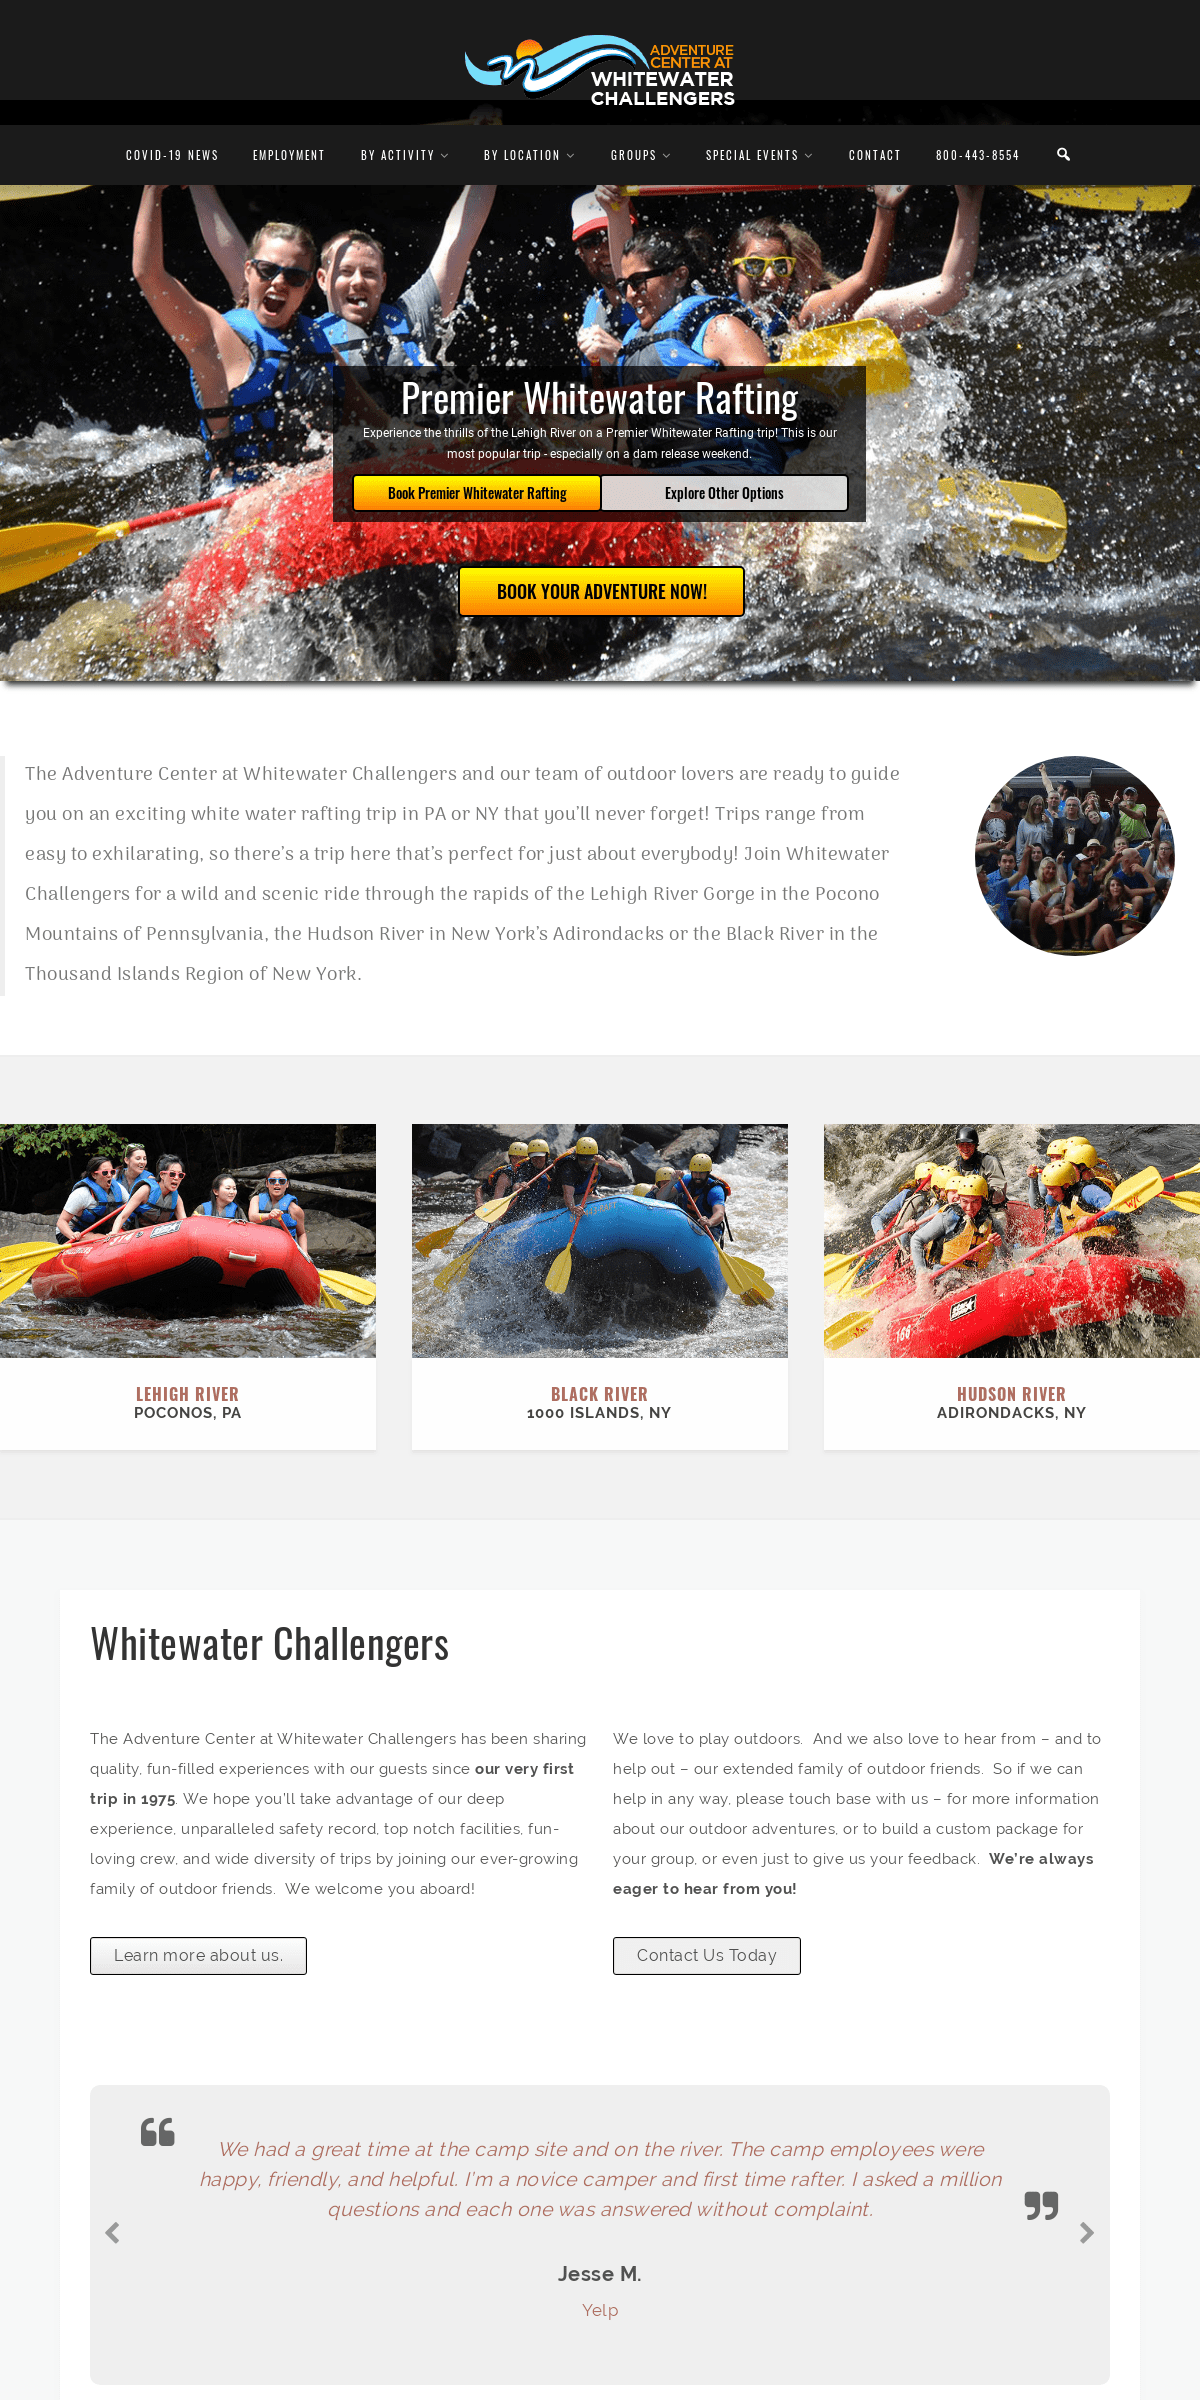 A complete backup of whitewaterchallengers.com